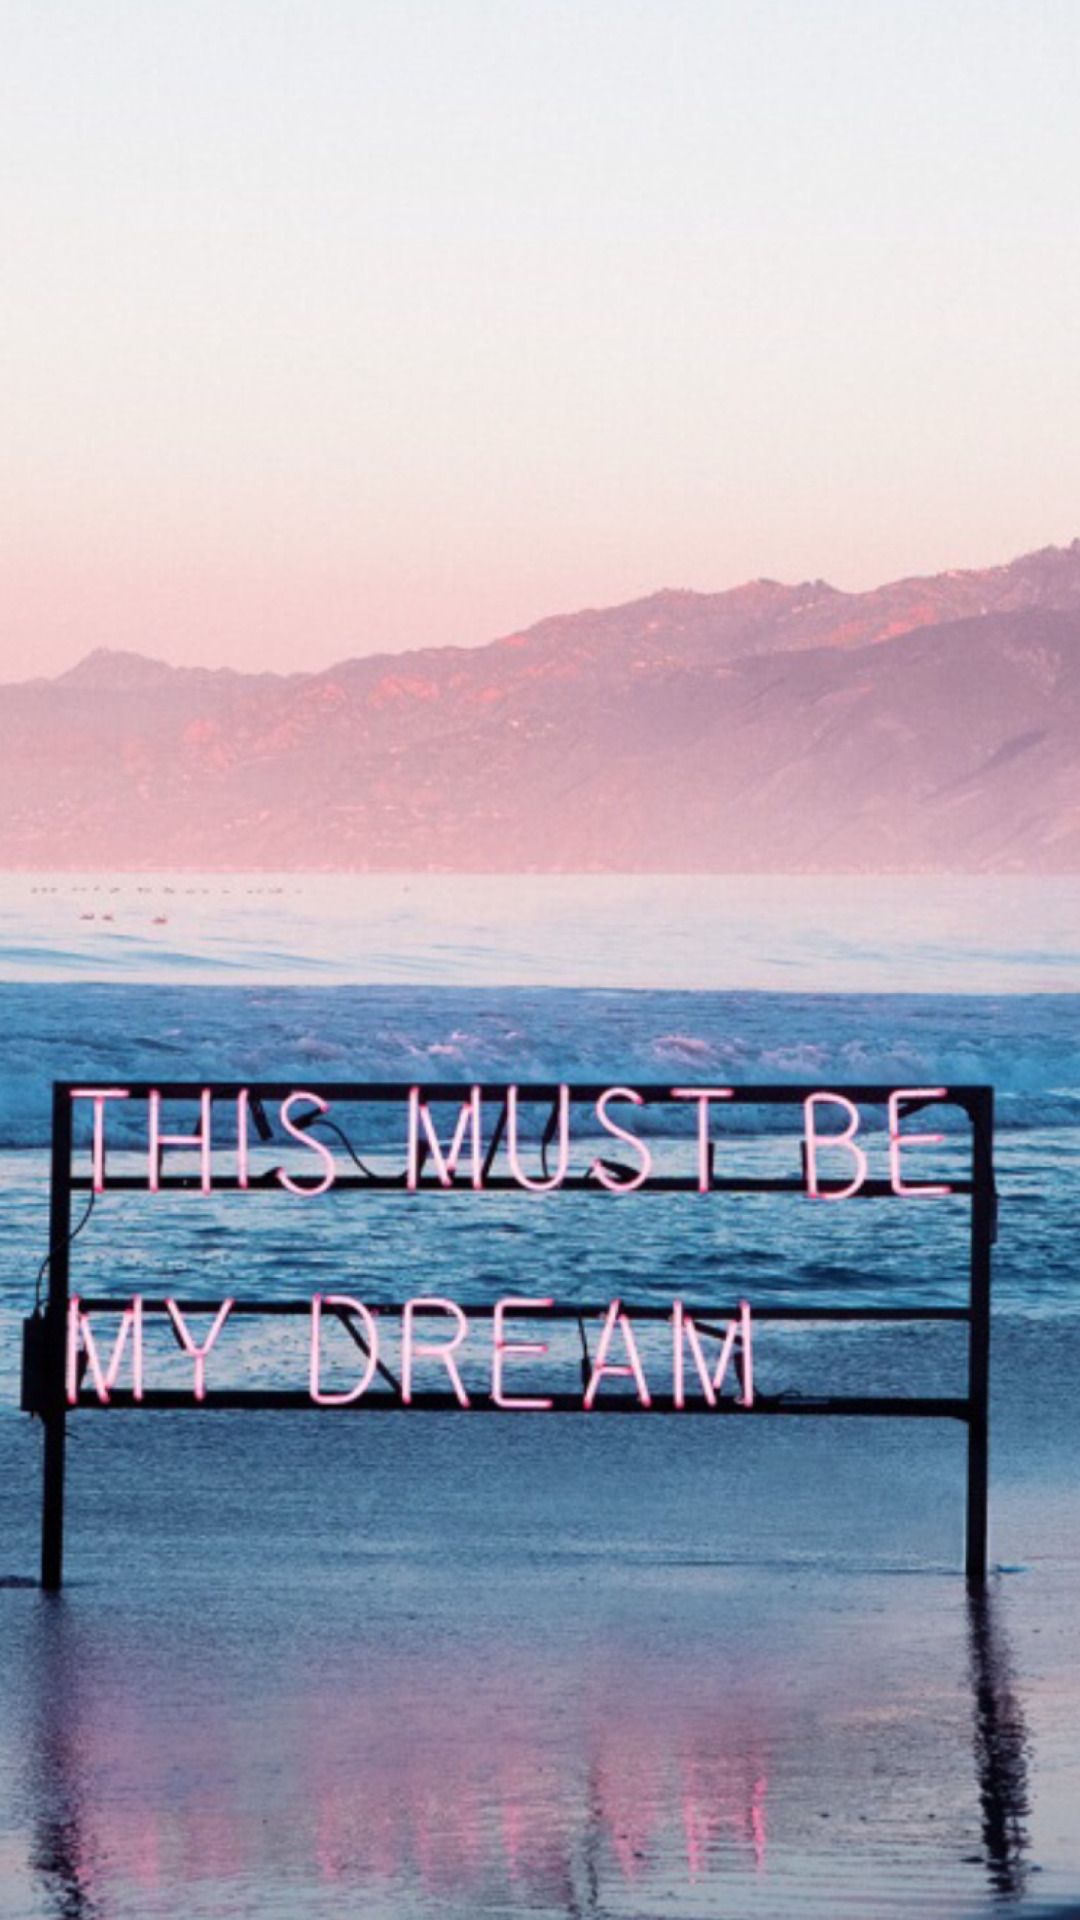 IPhone wallpaper of a dream sign in the ocean - Phone